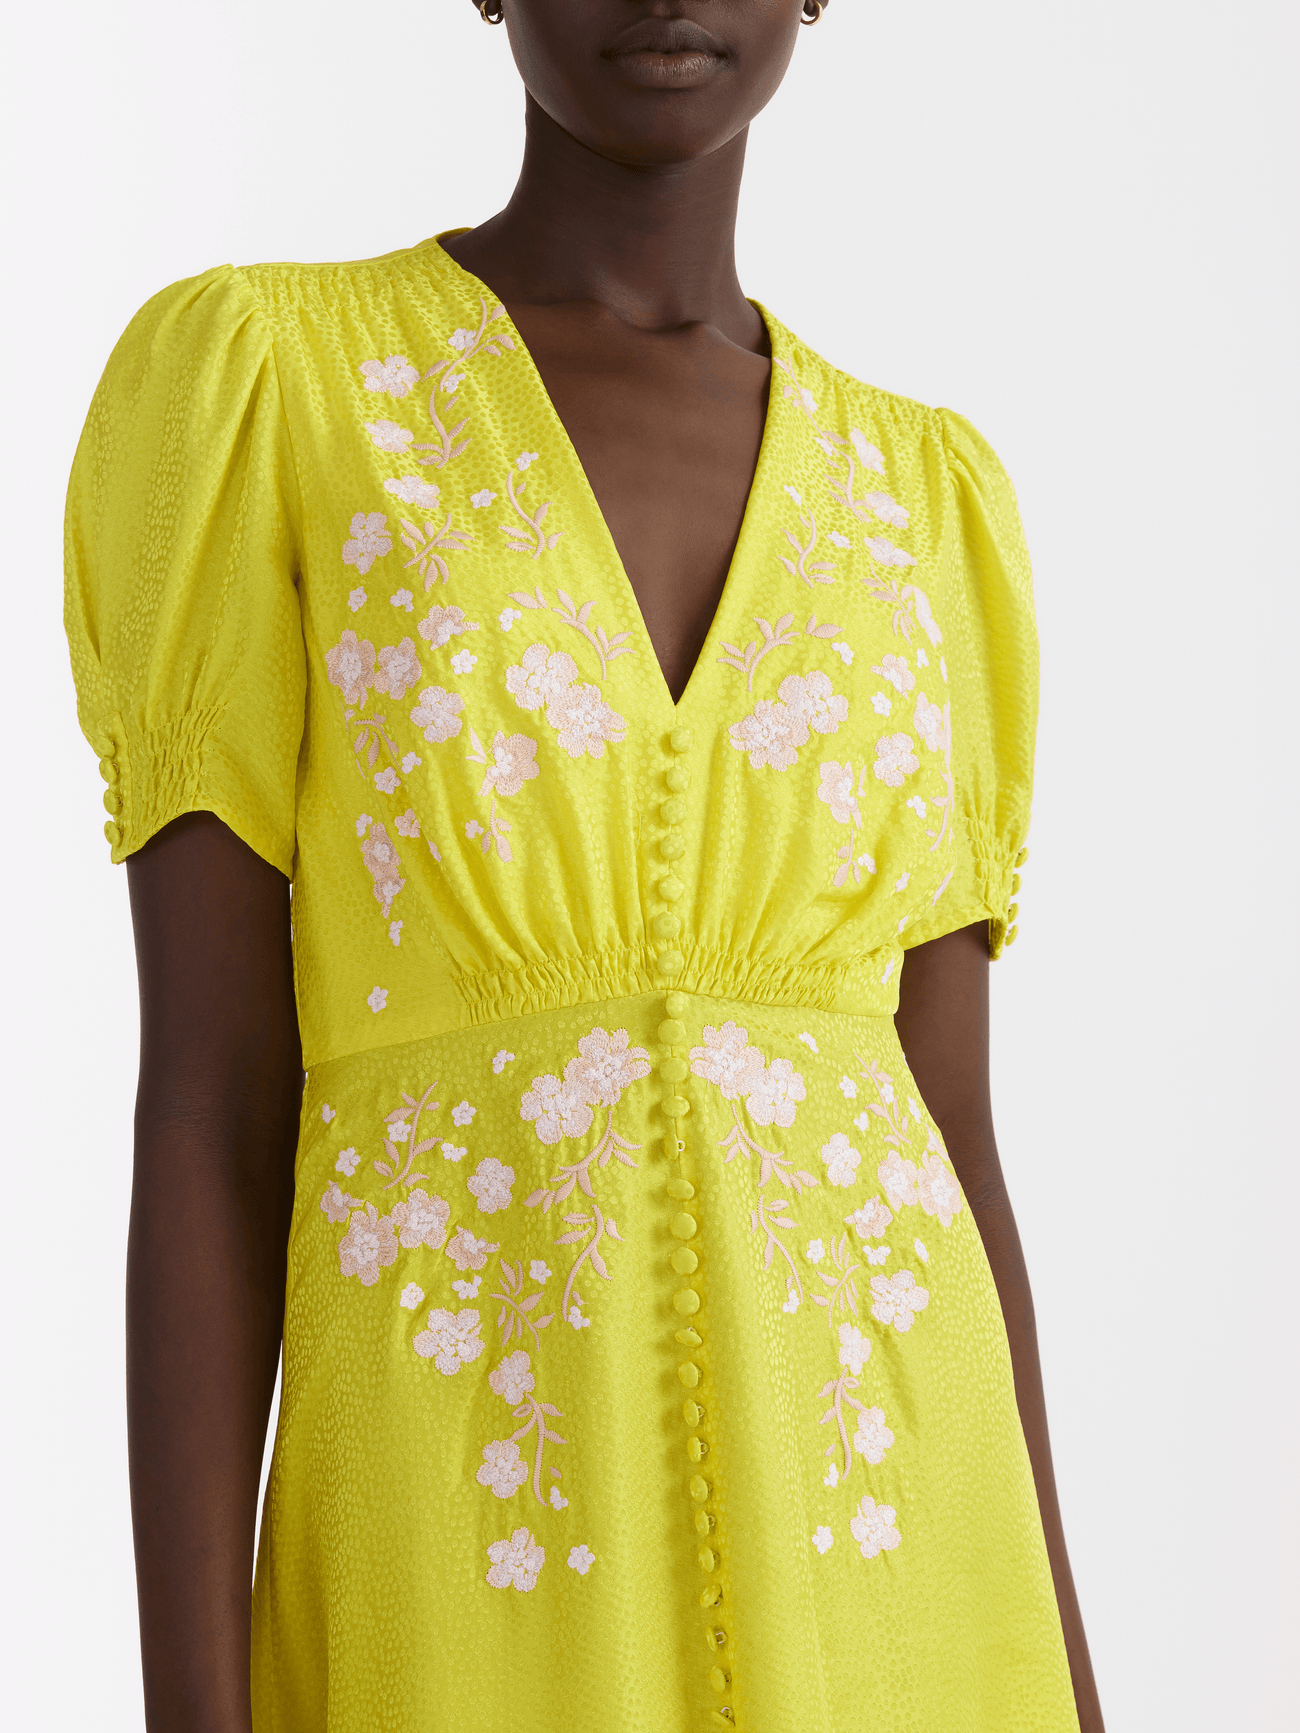 Load image into Gallery viewer, Lea Dress in Bright Lemon